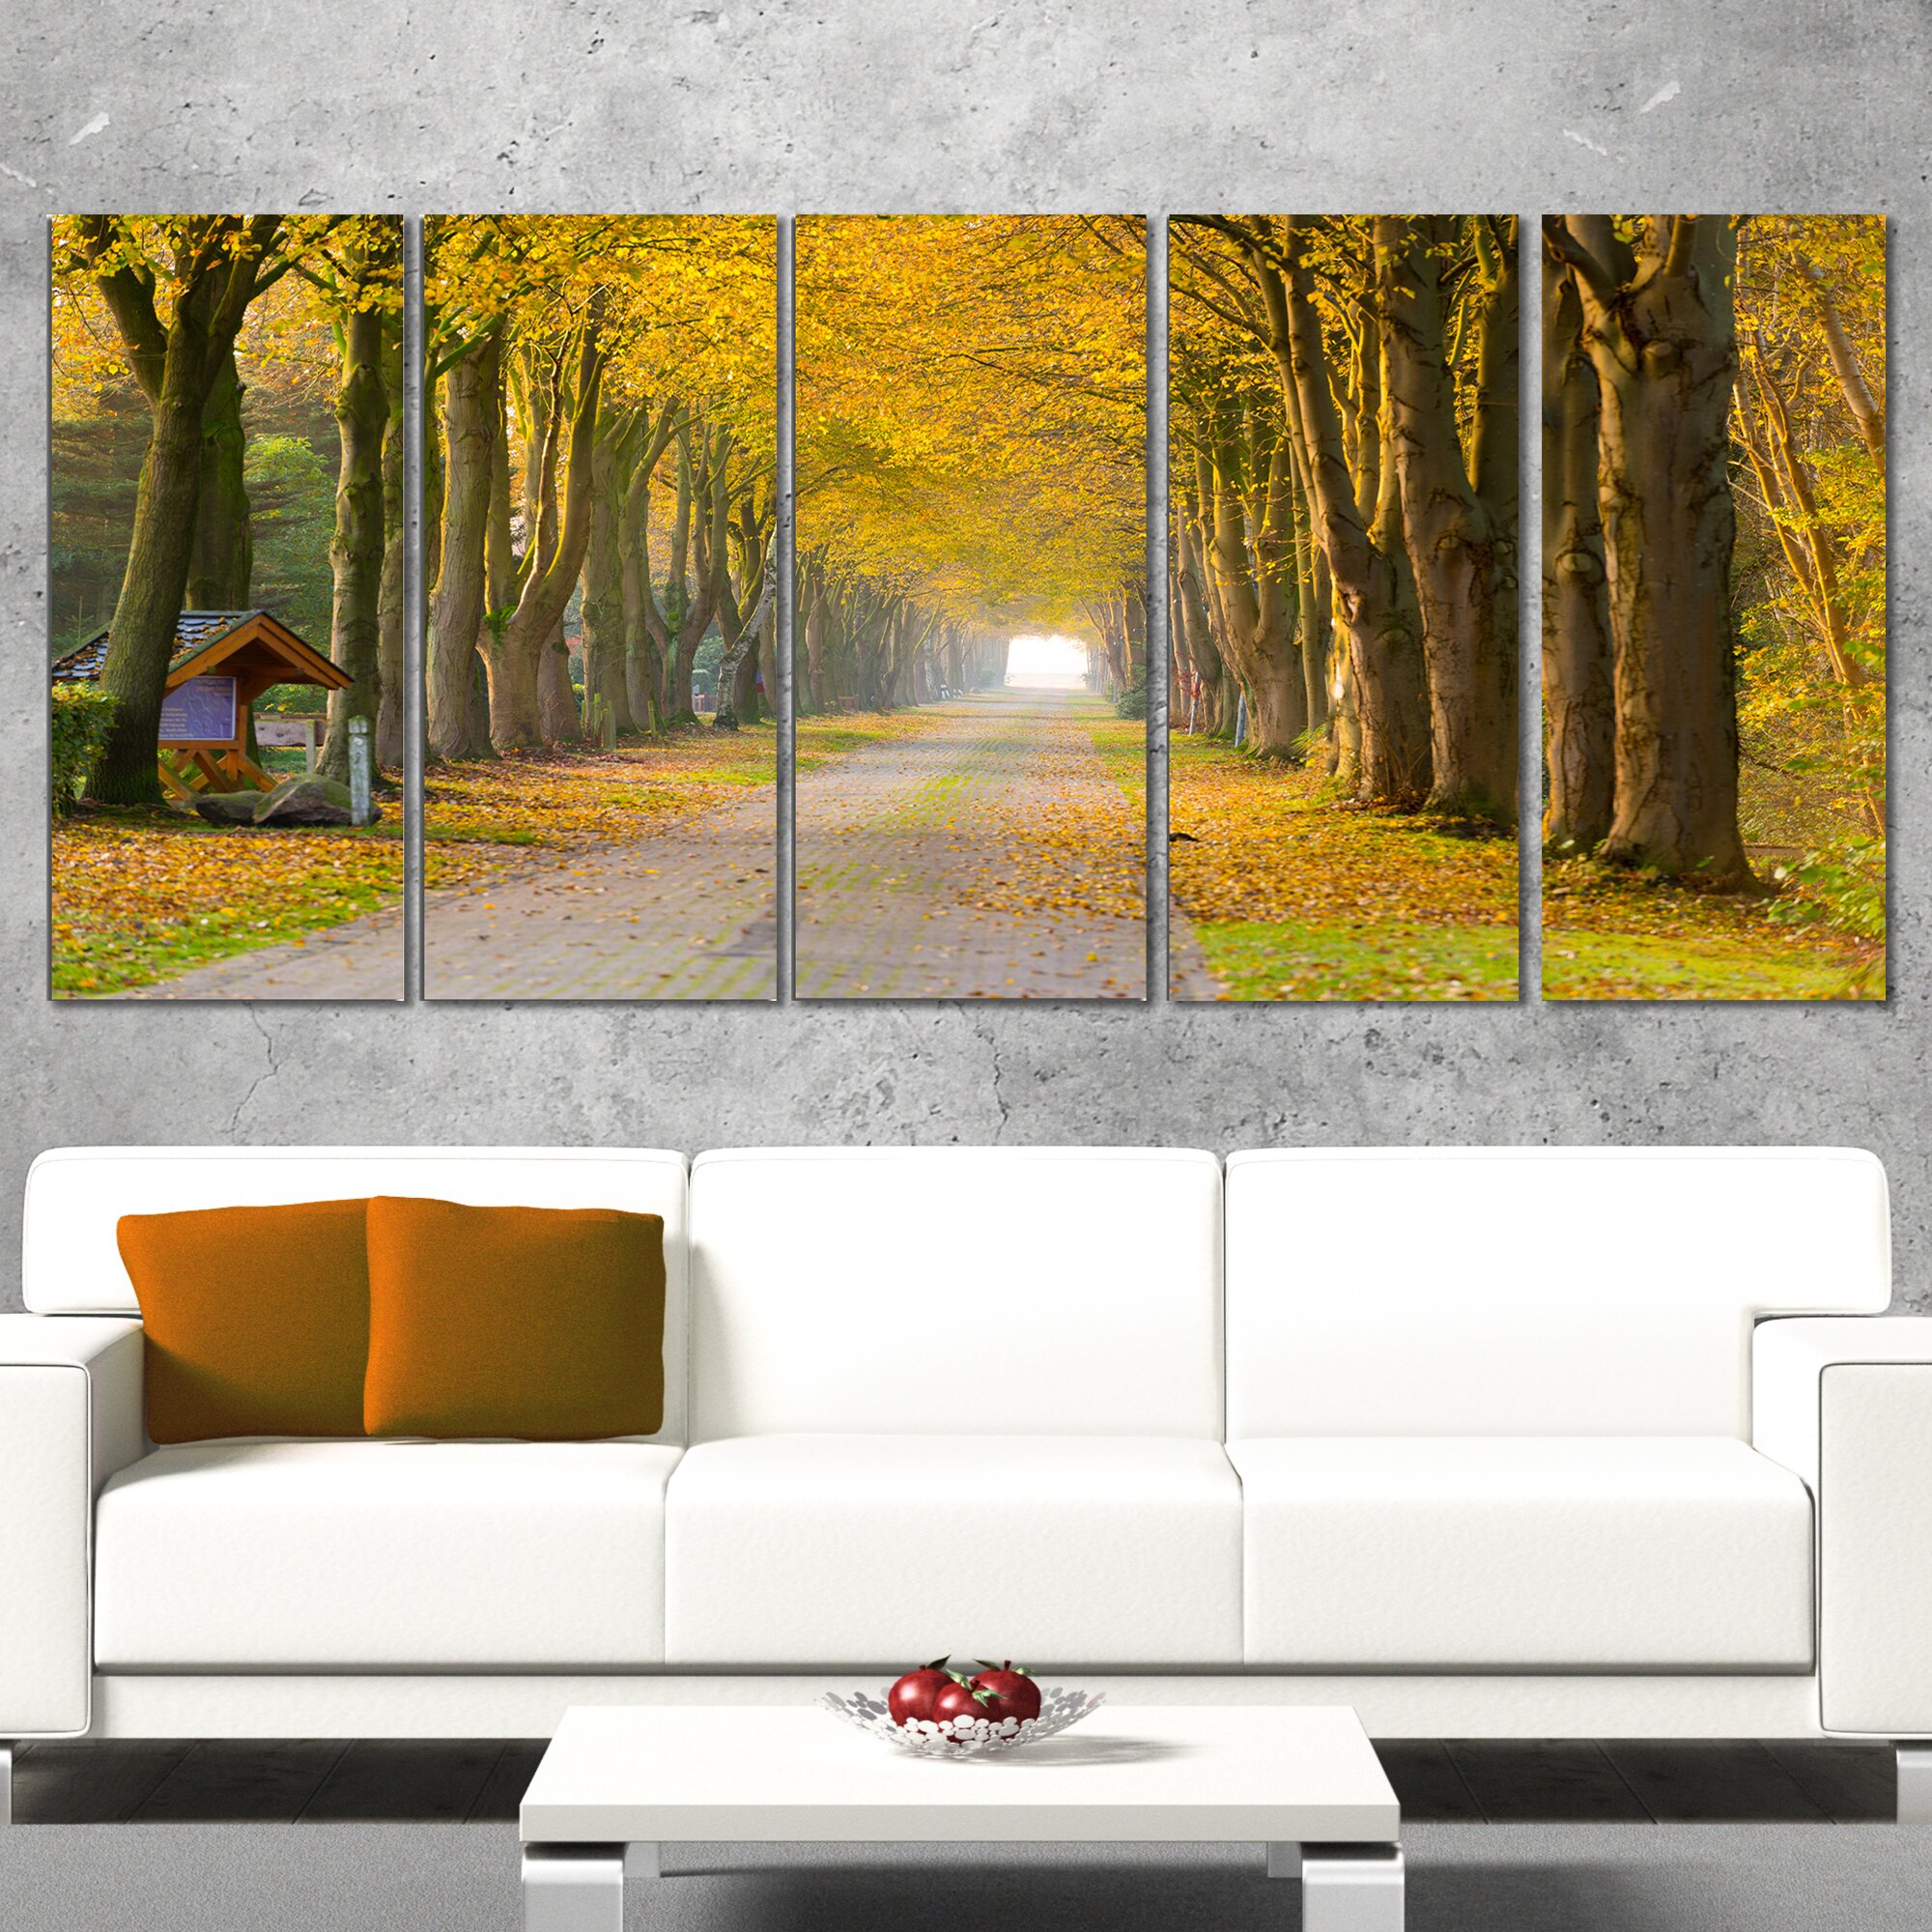 DesignArt Country Road Below Yellow Trees 5 Piece Wall Art on Wrapped ...